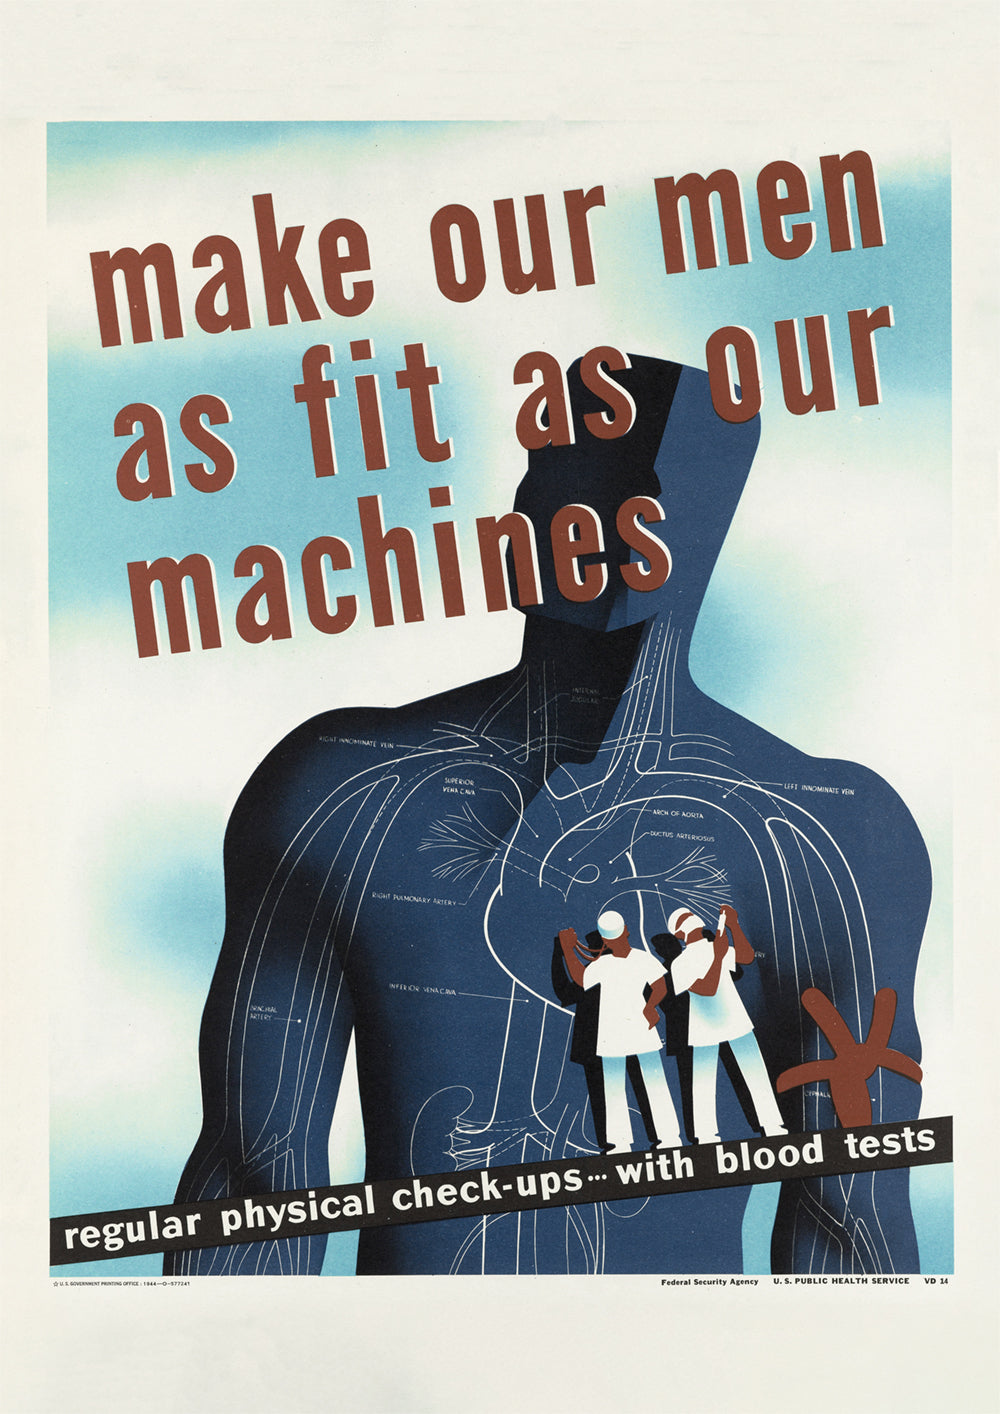 Make our men as fit as our machines – American poster